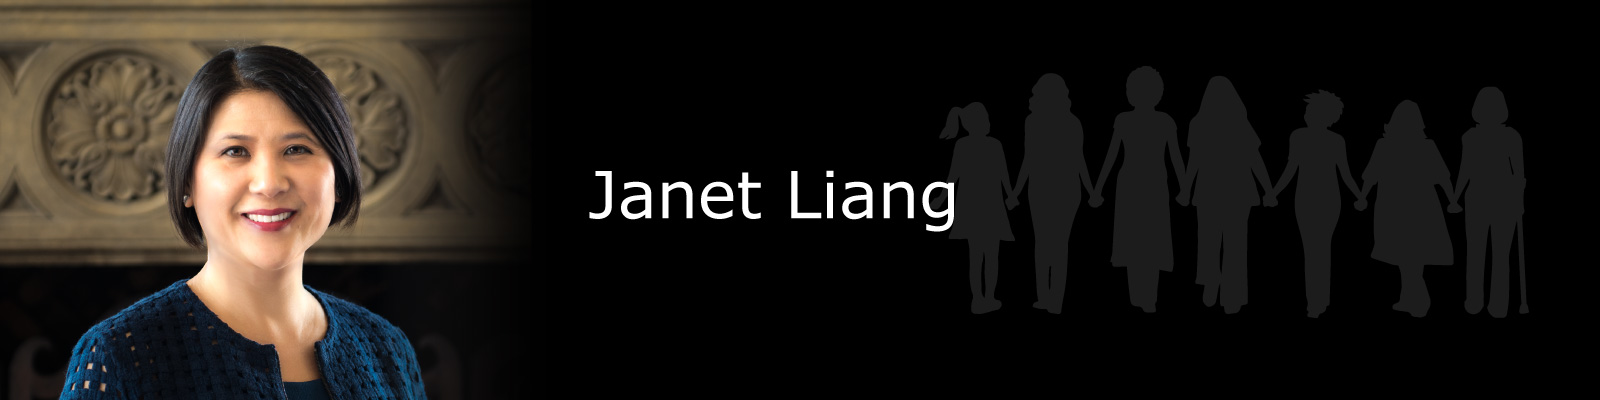 Photo of Janet Liang.